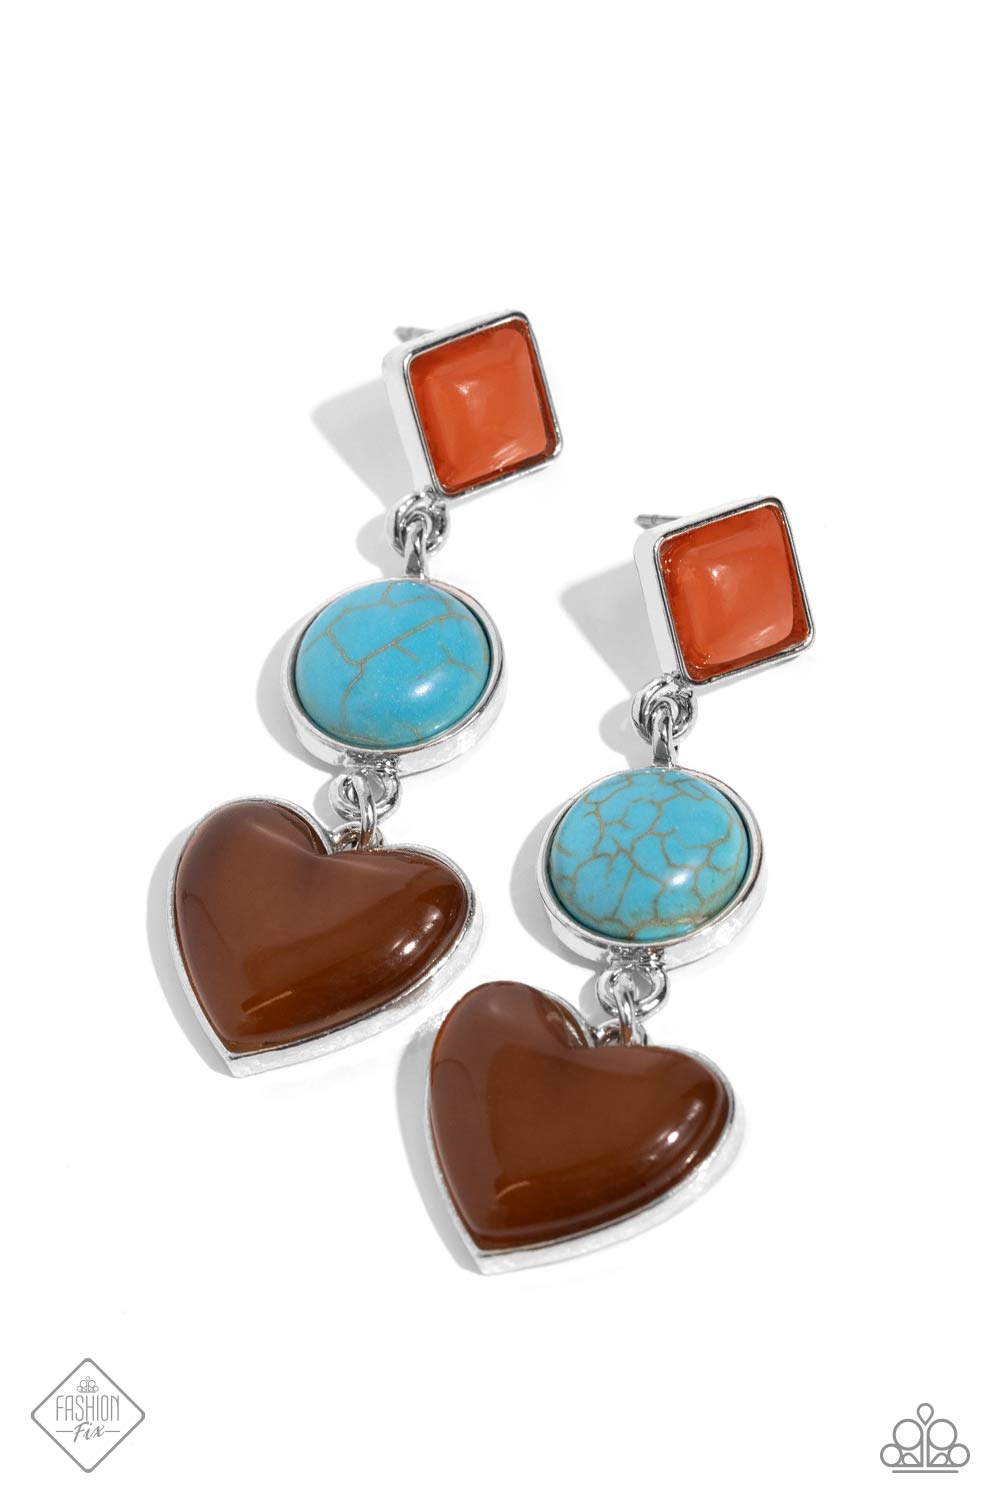 Desertscape Debut Brown Stone Earrings Paparazzi $5 Jewelry. #P5PO-BNXX-040SI. Subscribe & Save